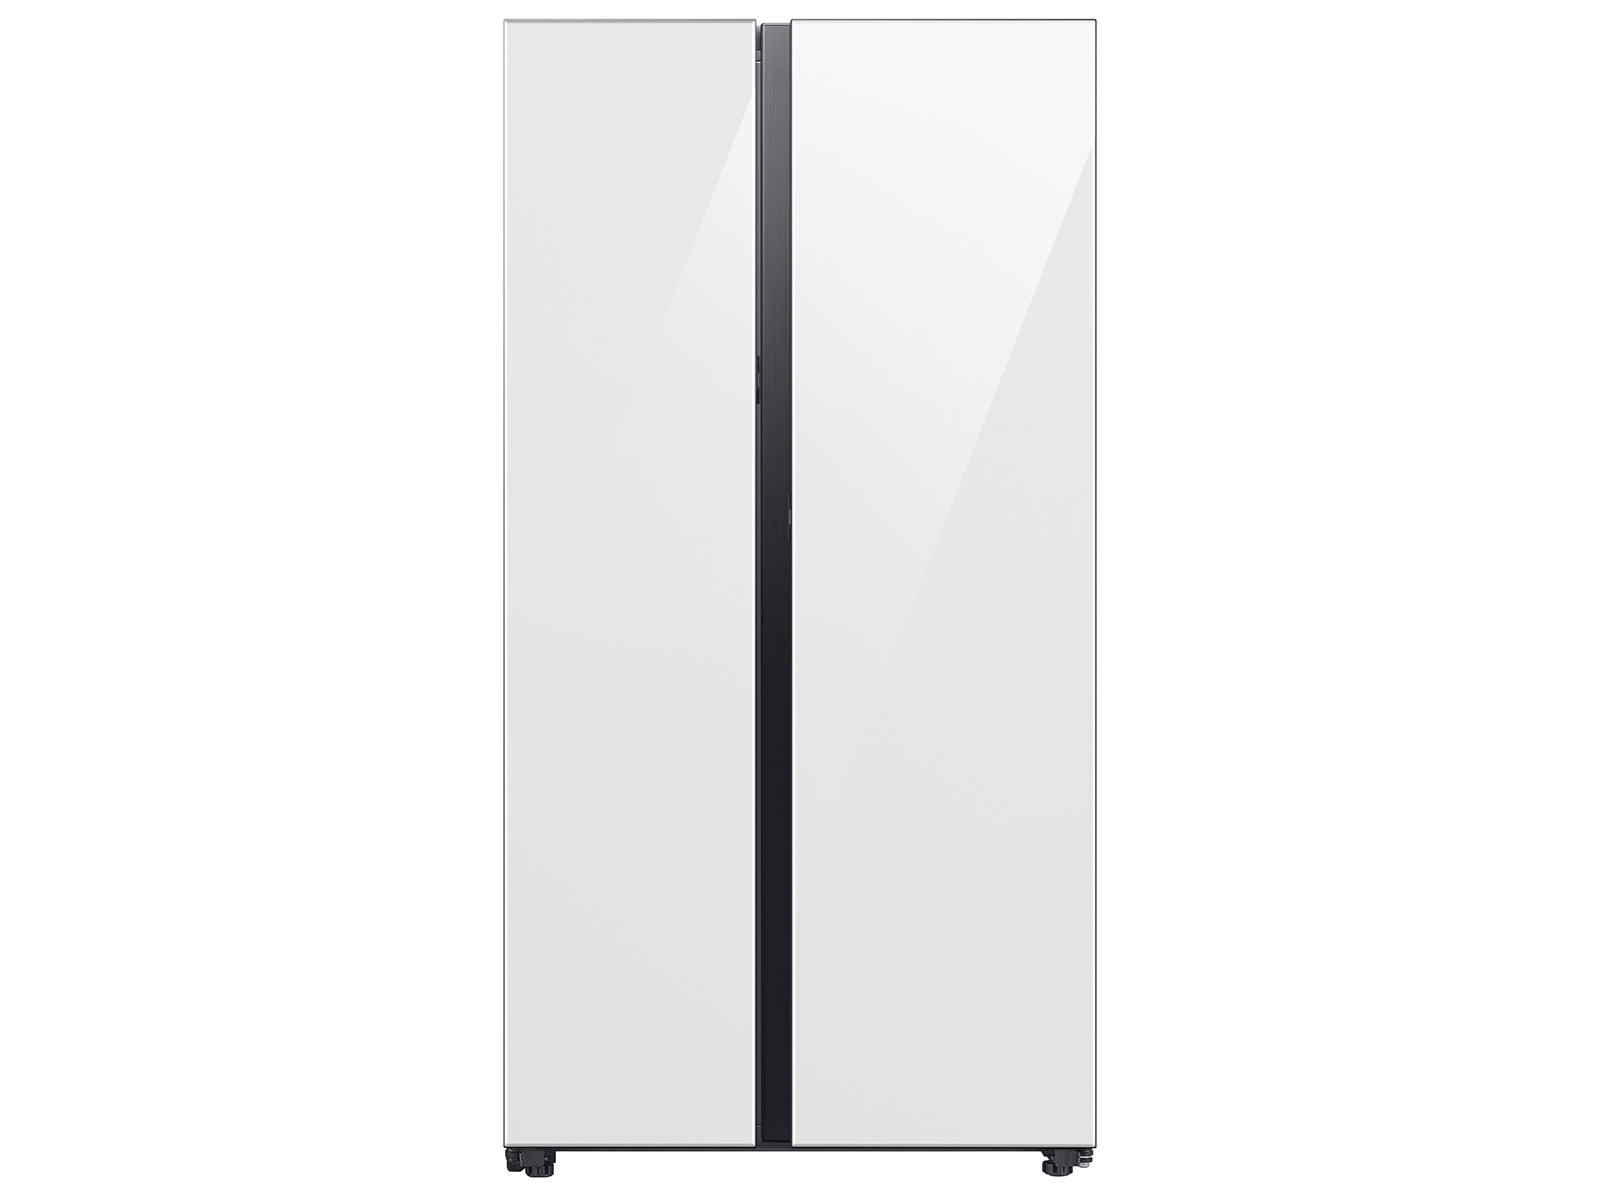 Thumbnail image of Bespoke Side-by-Side 28 cu. ft. Refrigerator with Beverage Center™ in White Glass